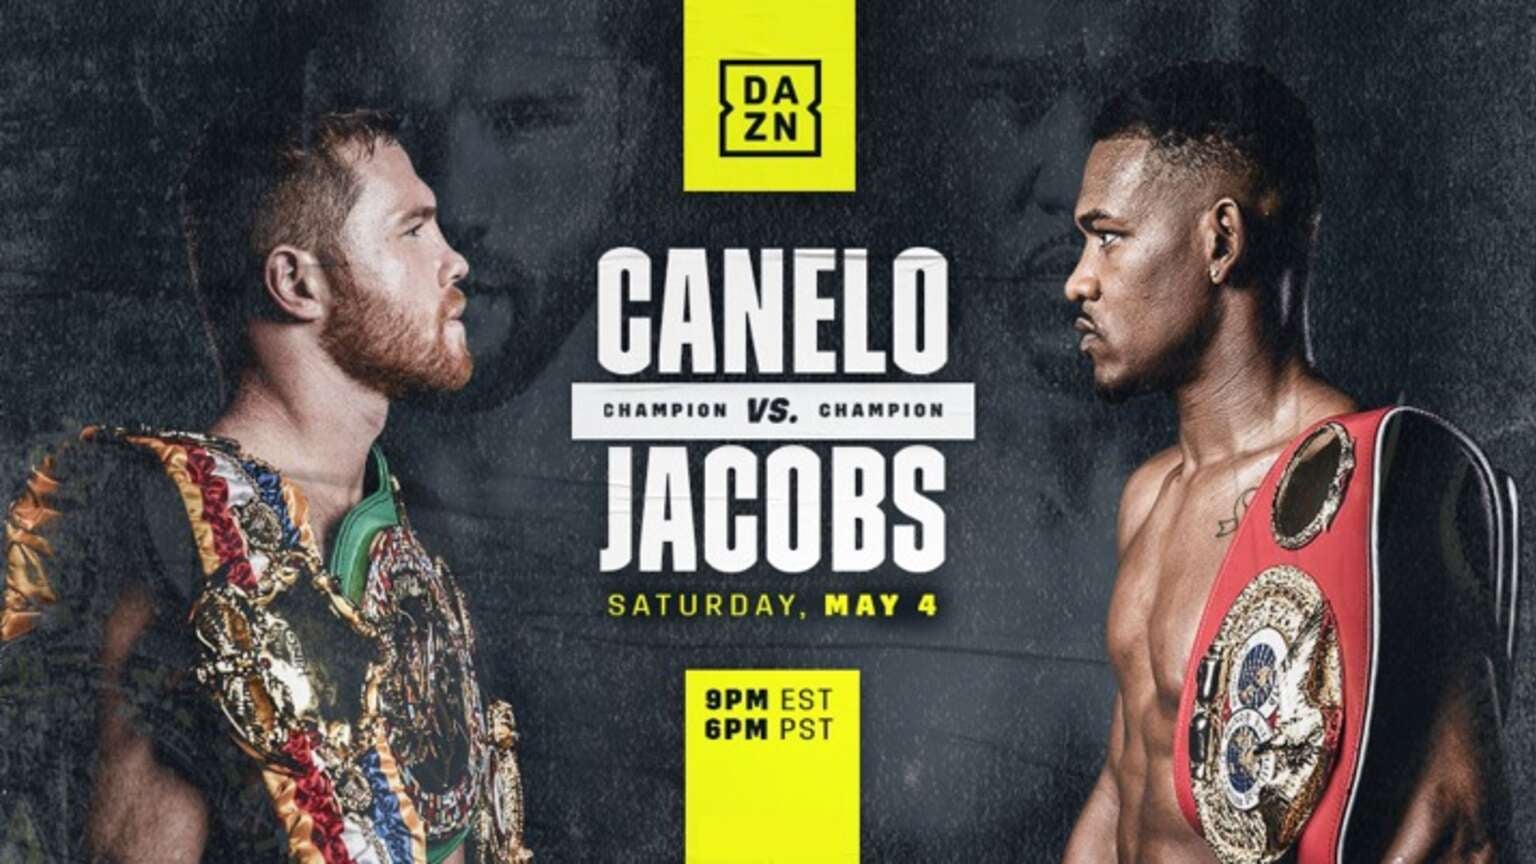 How to Watch Canelo vs